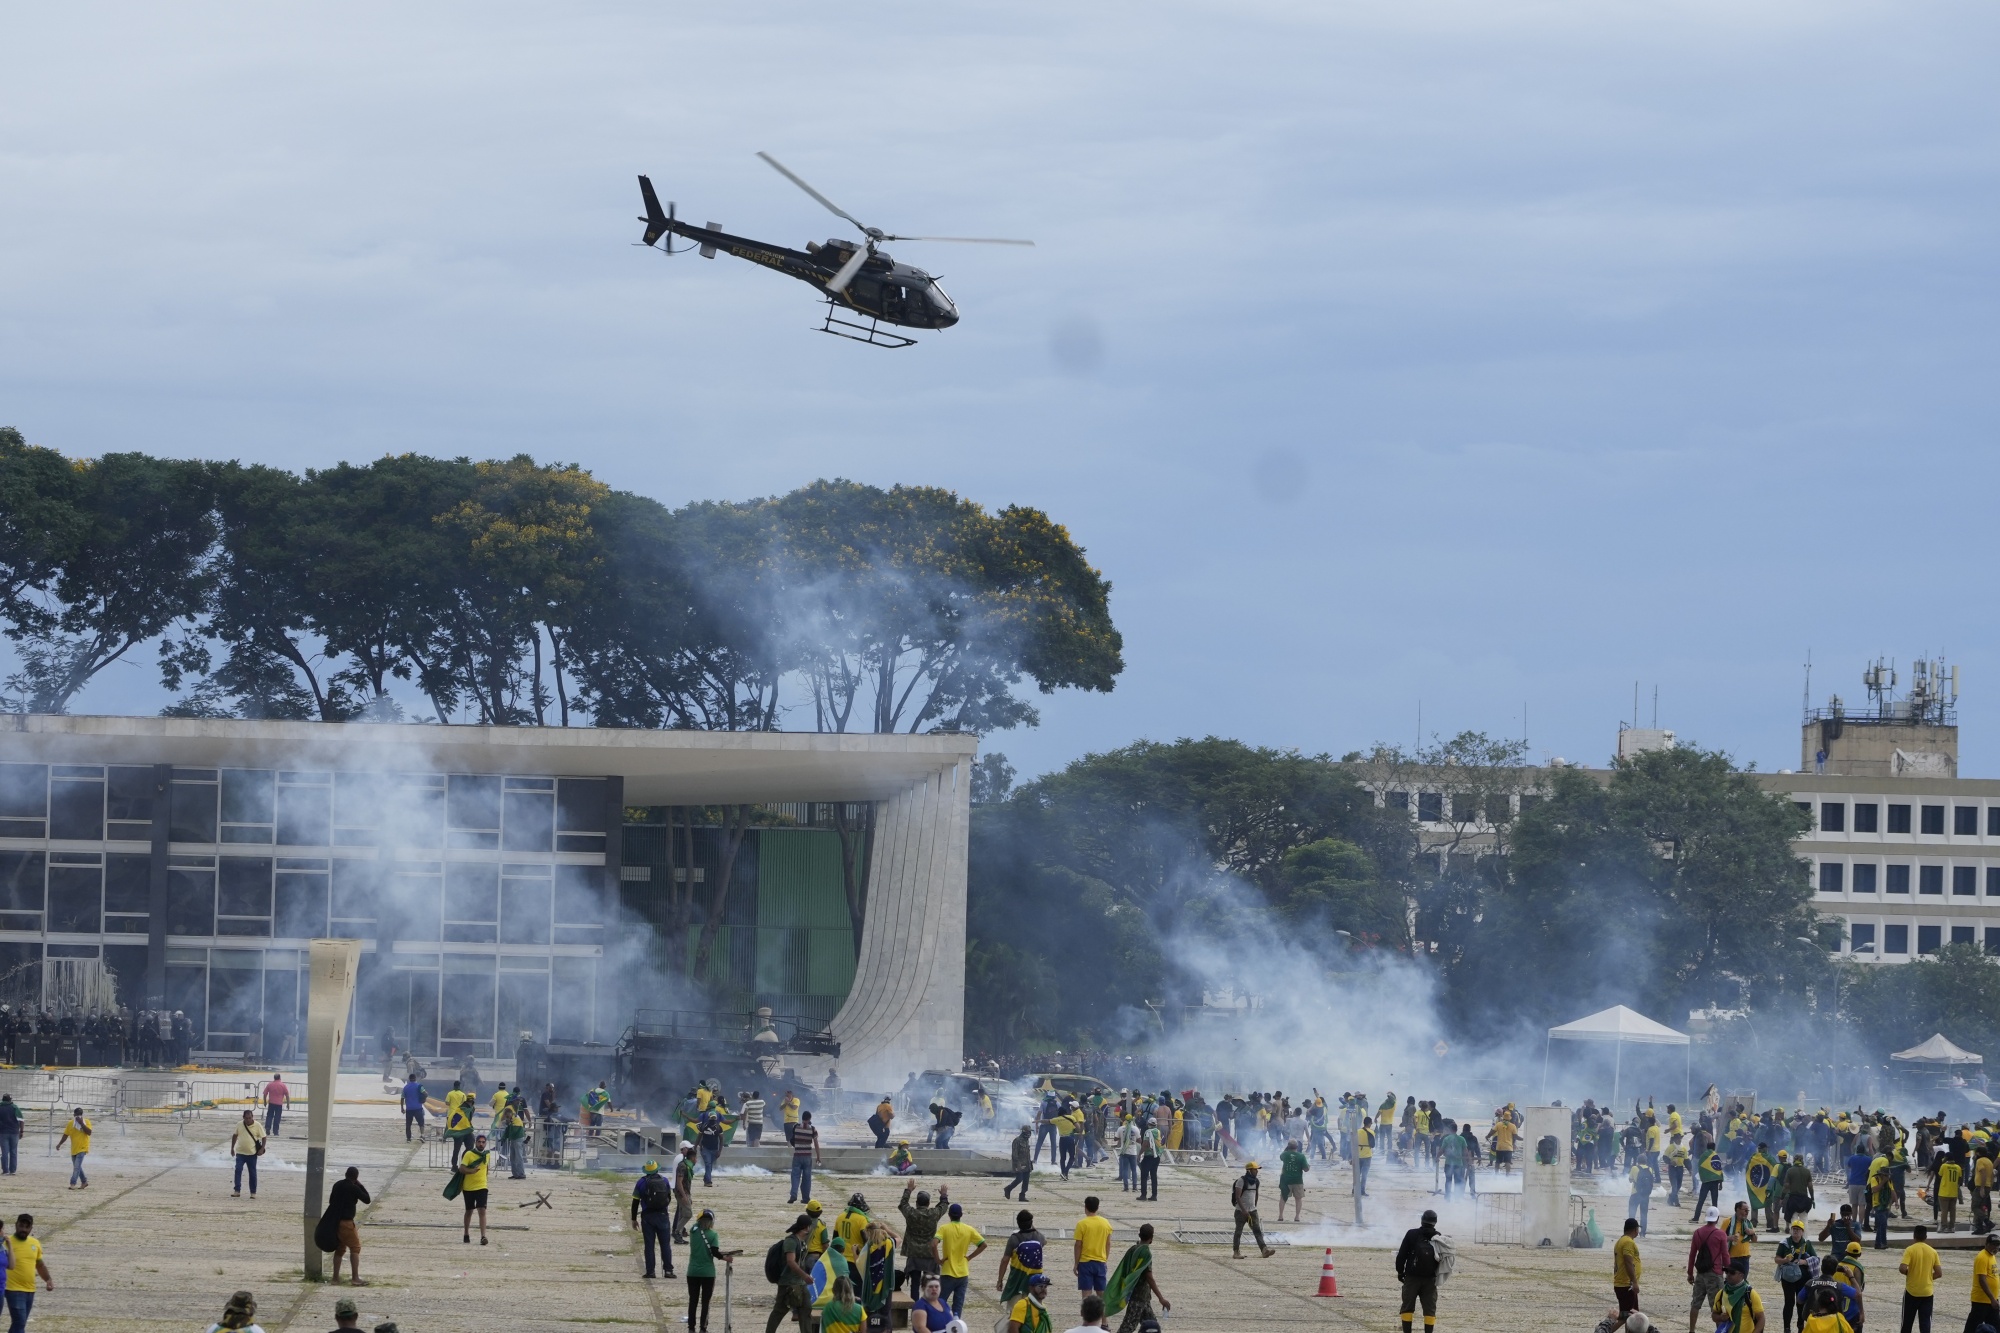 relates to In Pictures: Brazil in Chaos as Protesters Storm Government Buildings